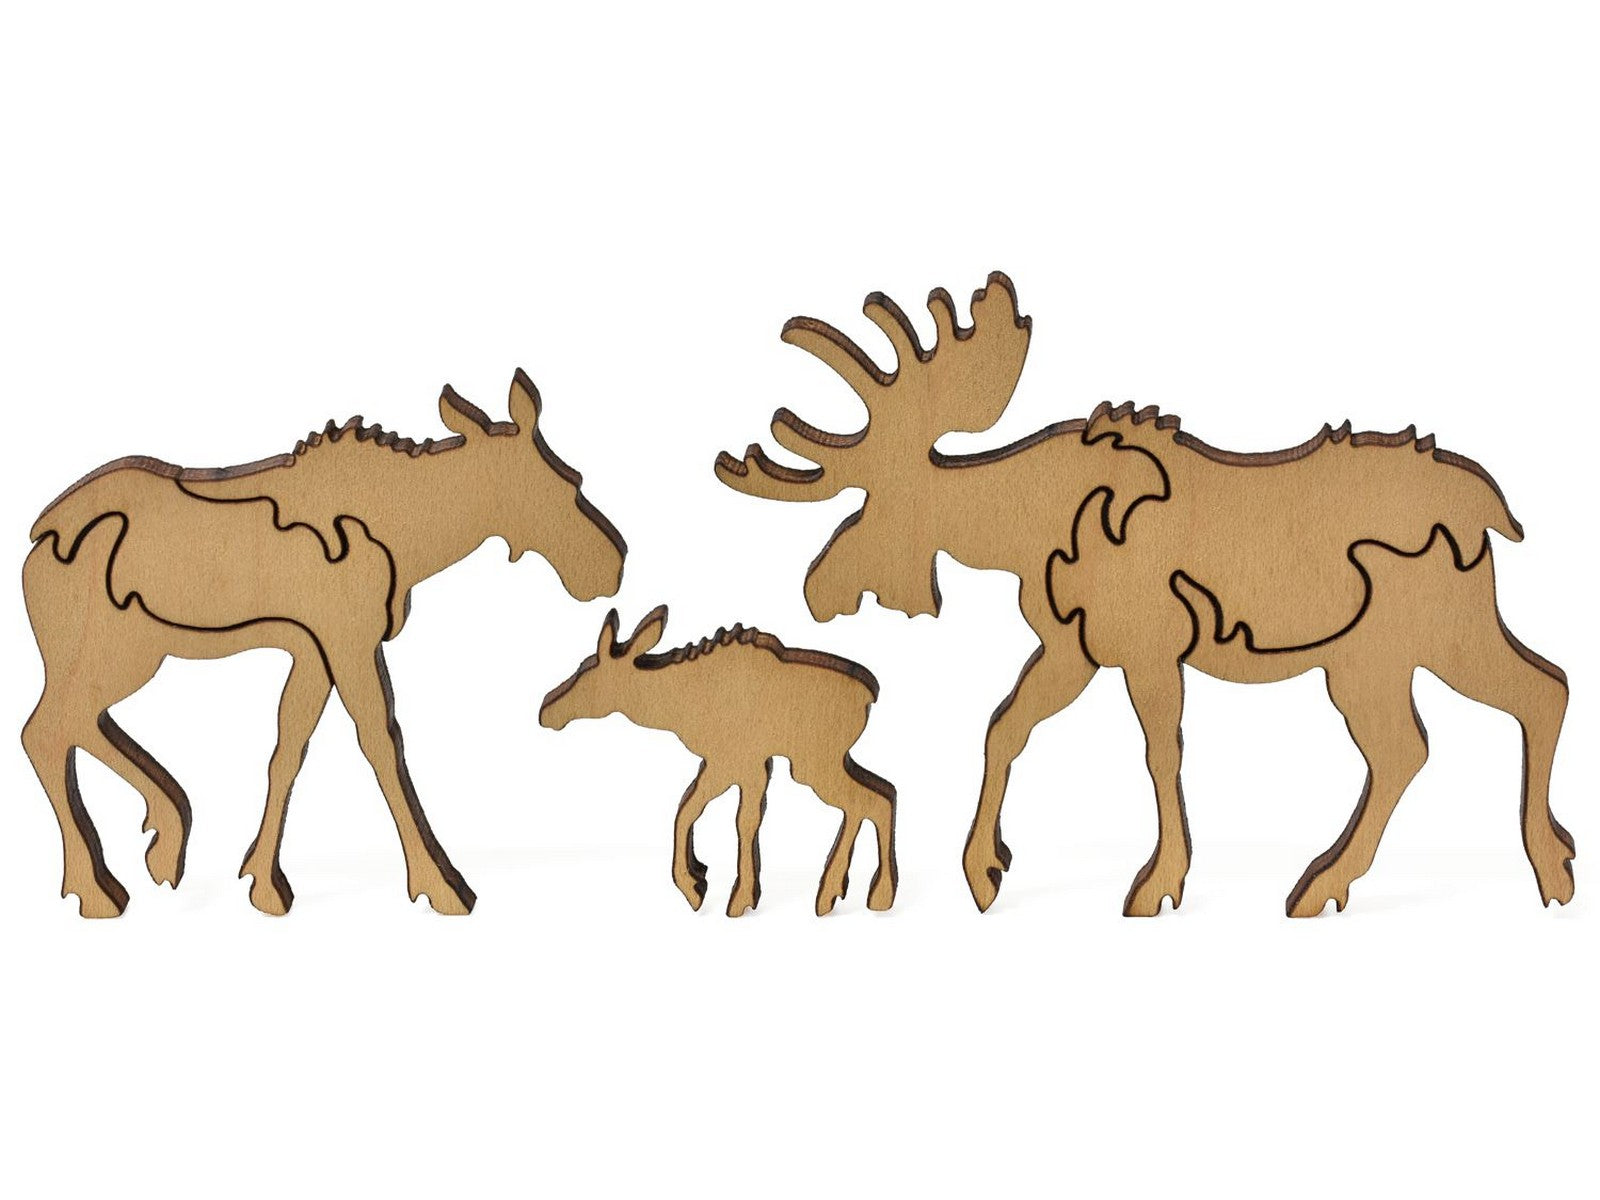 A closeup of pieces showing a family of moose.